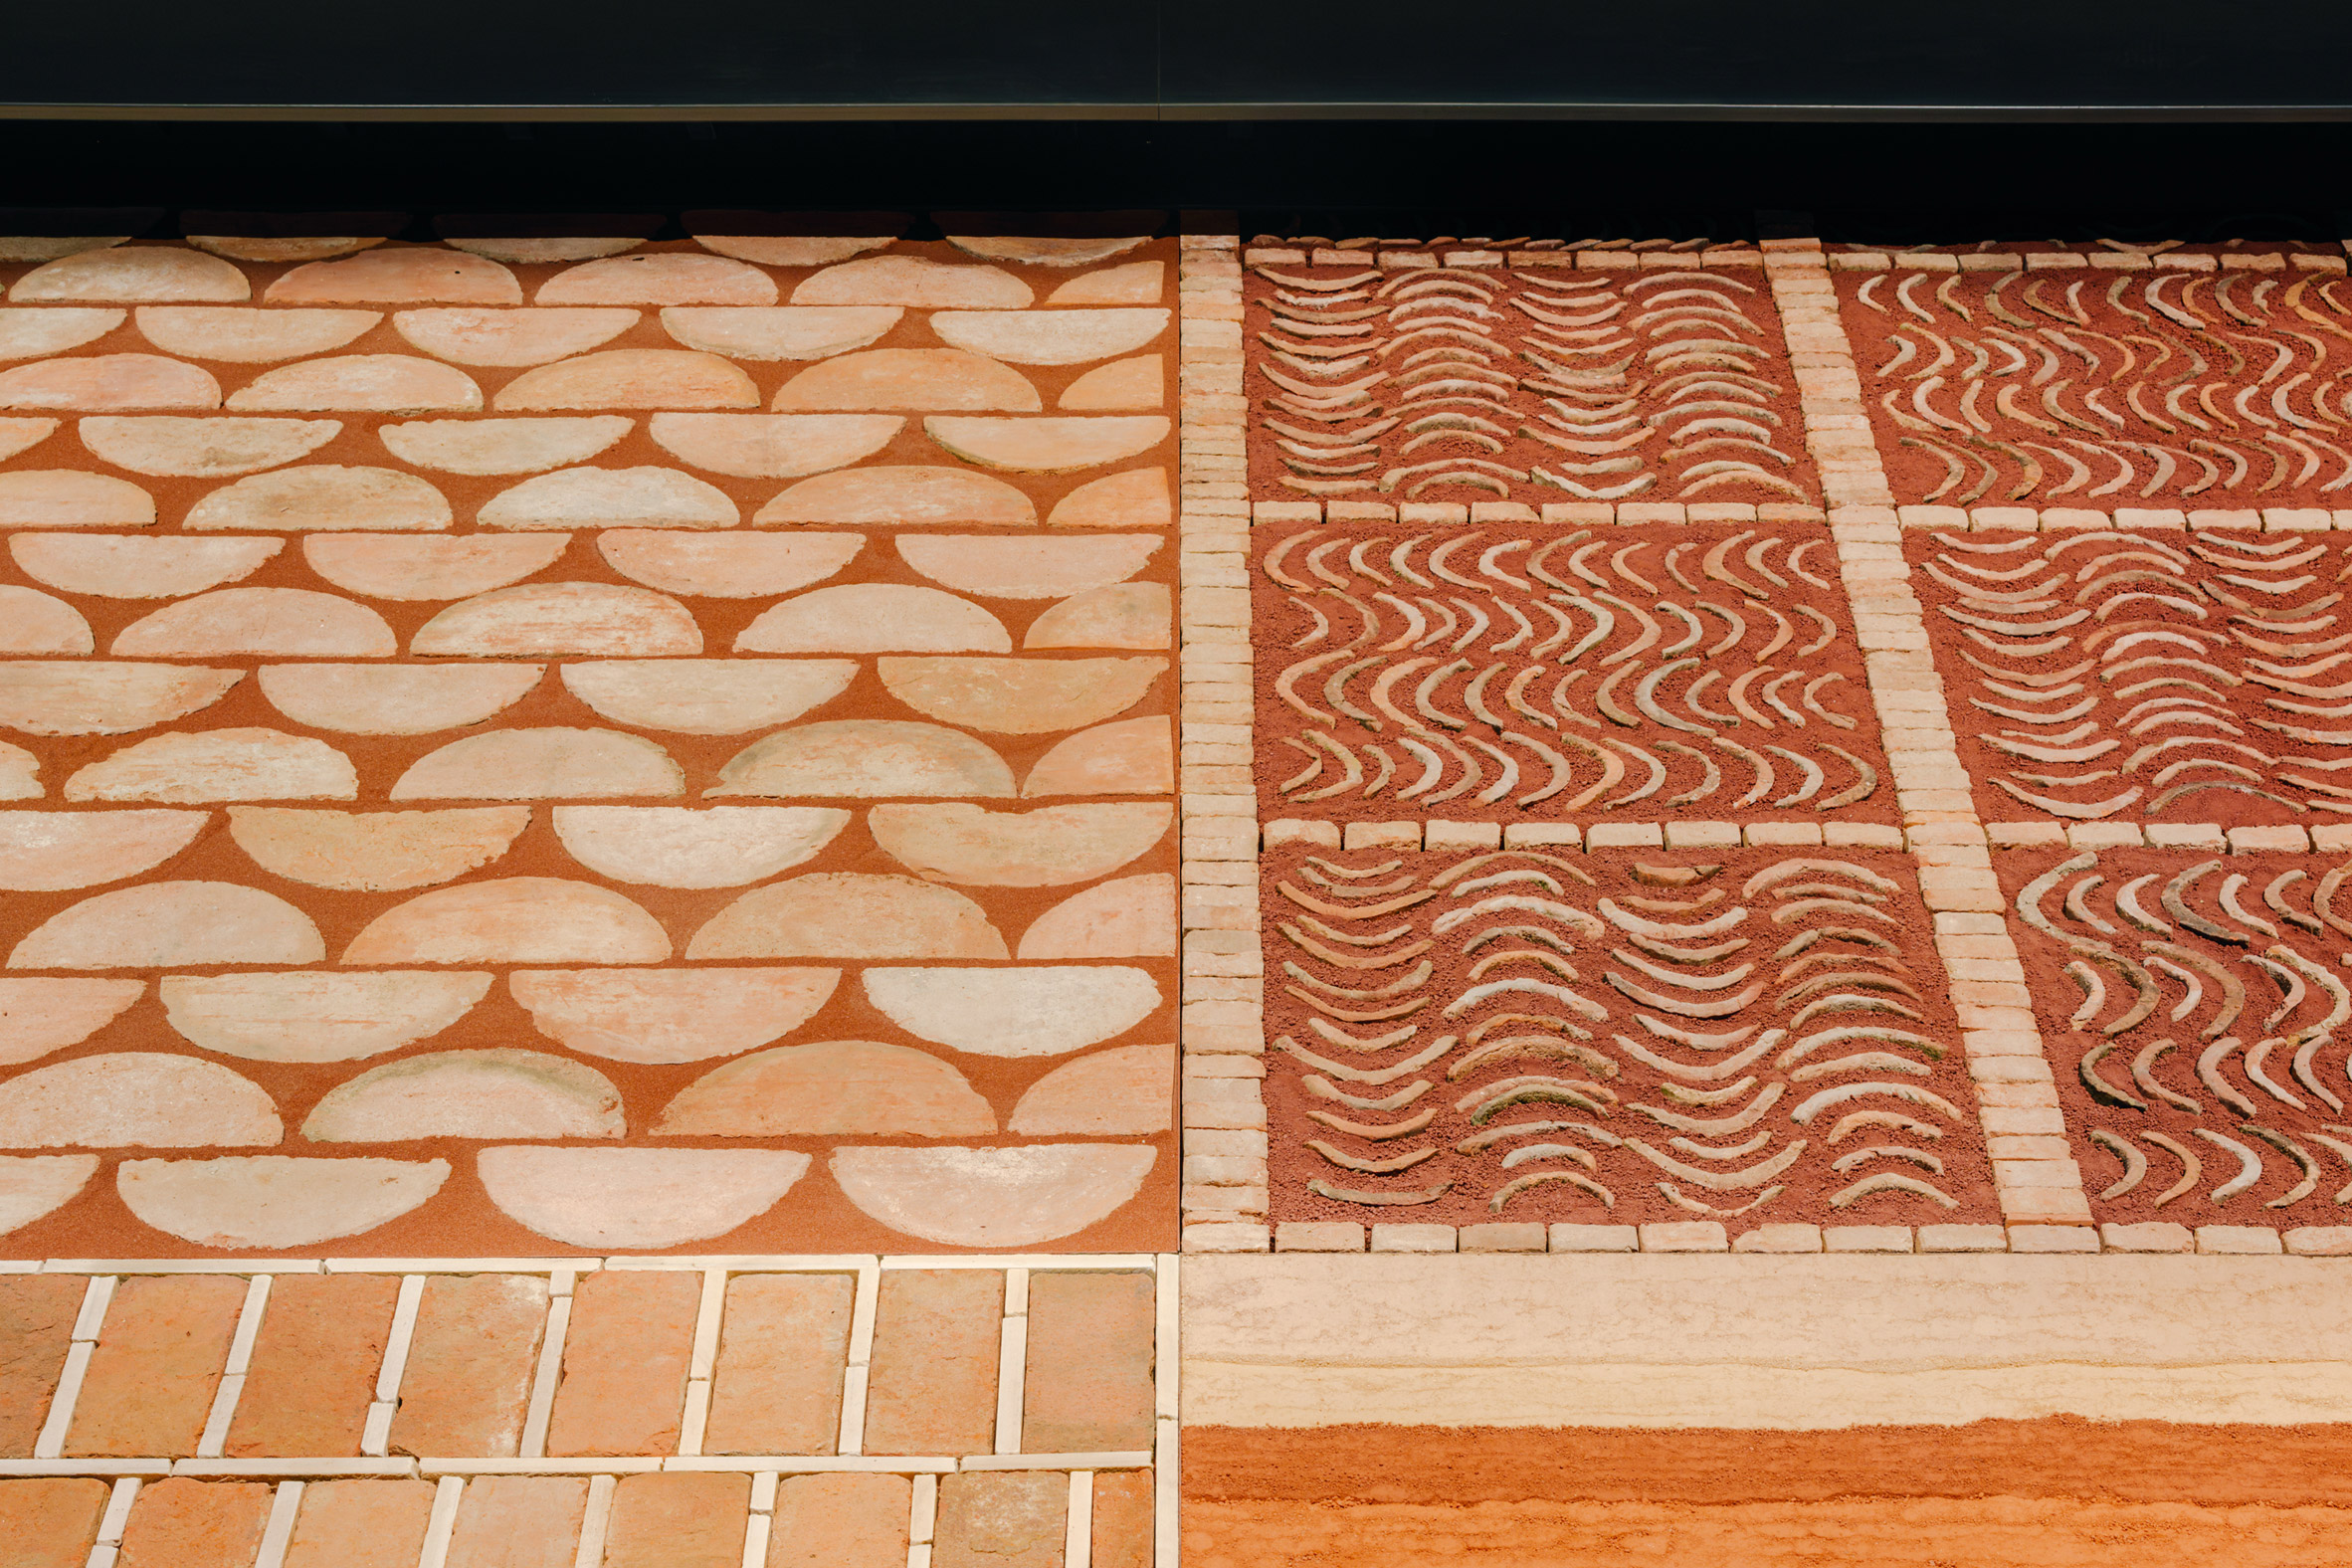 Patterned floor made from organic materials